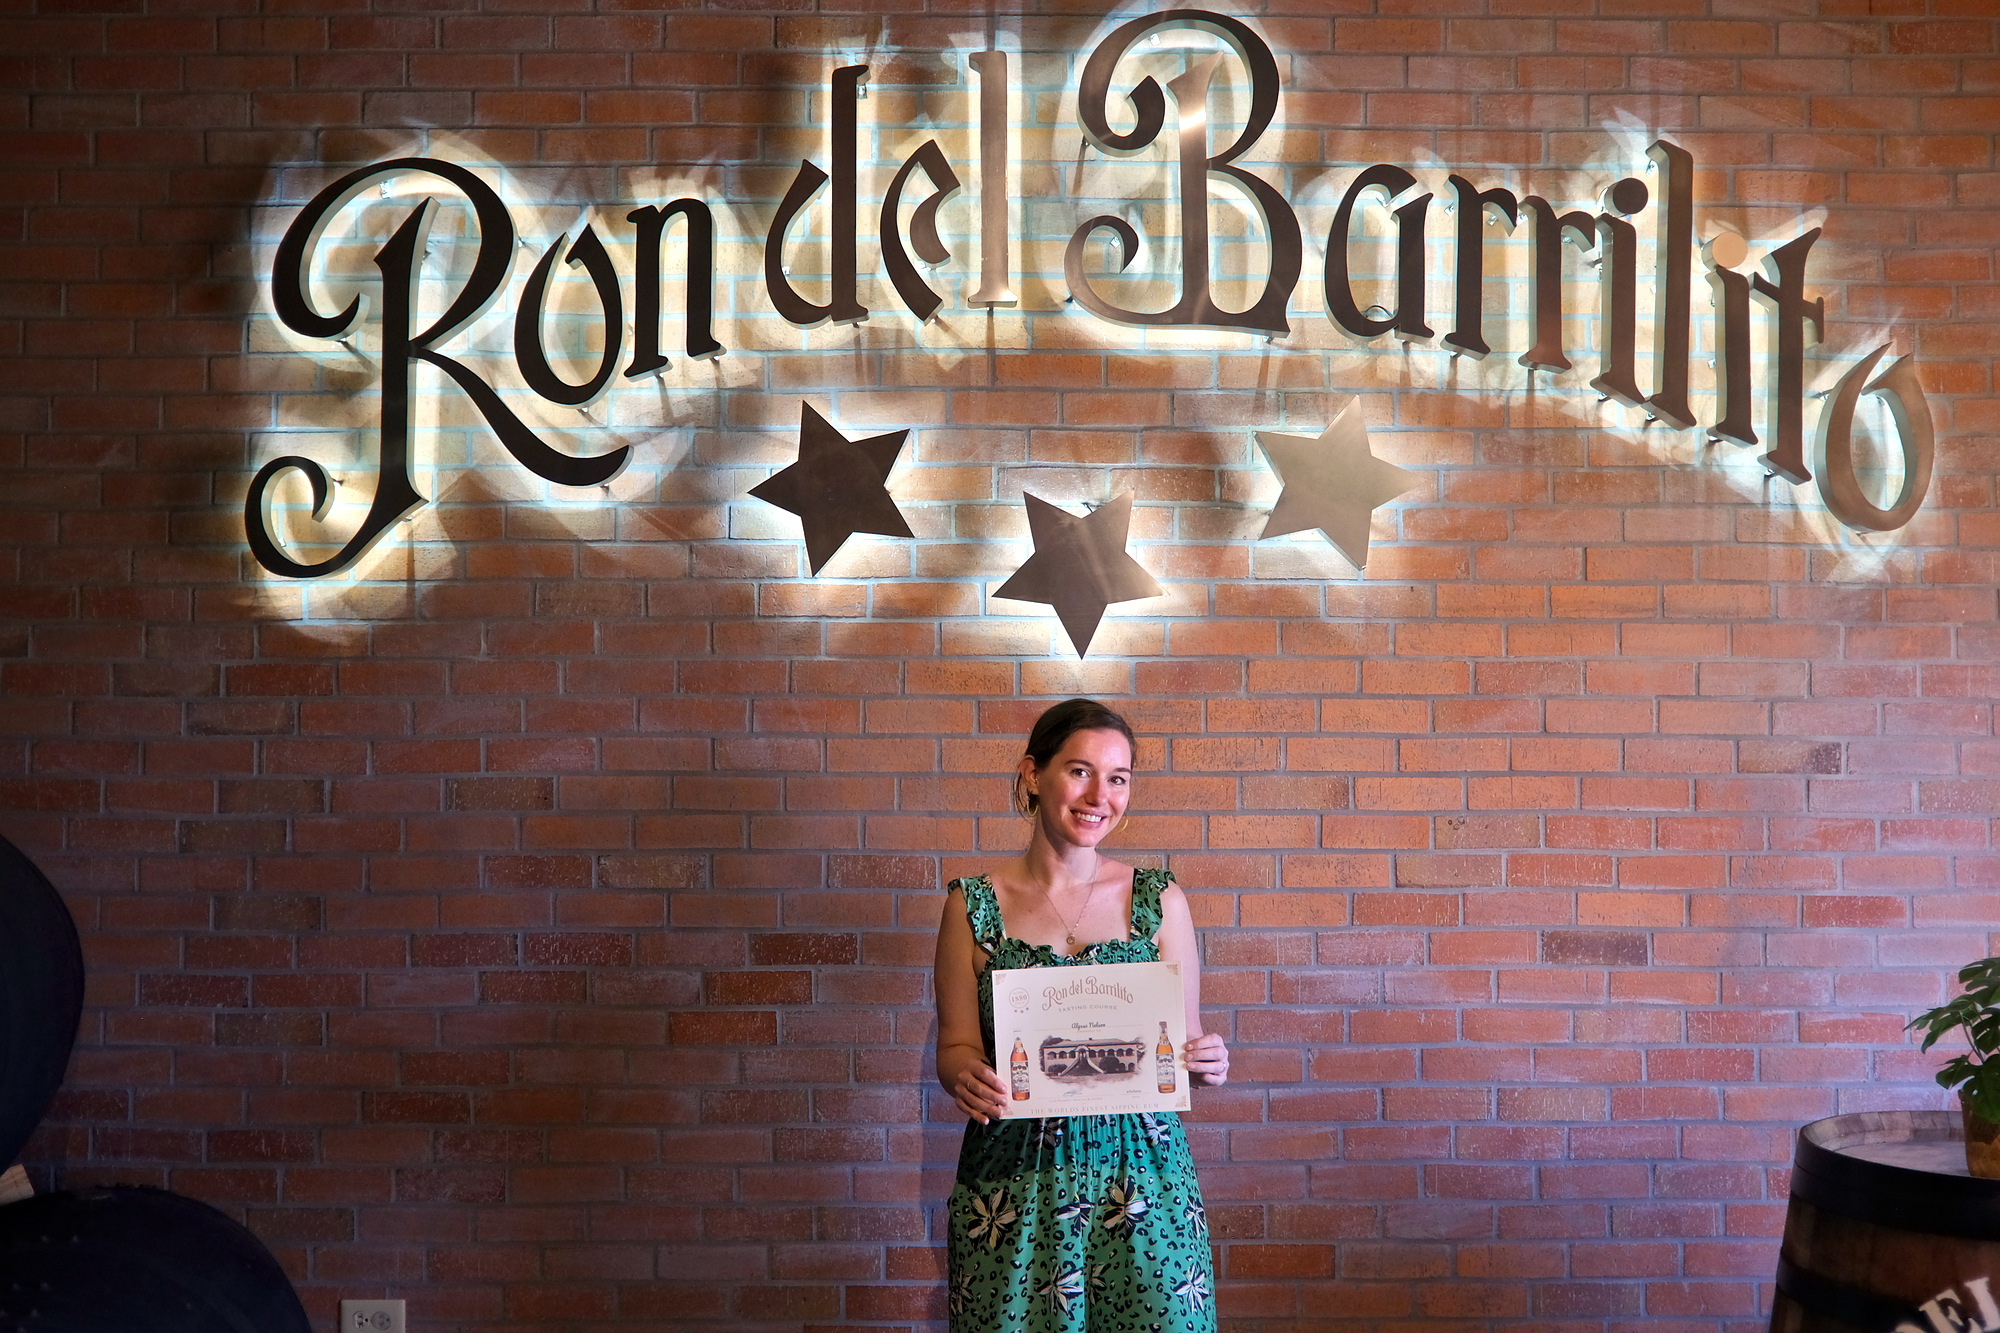 Alyssa holds a certificate in front of a Ron del Barrilito sign